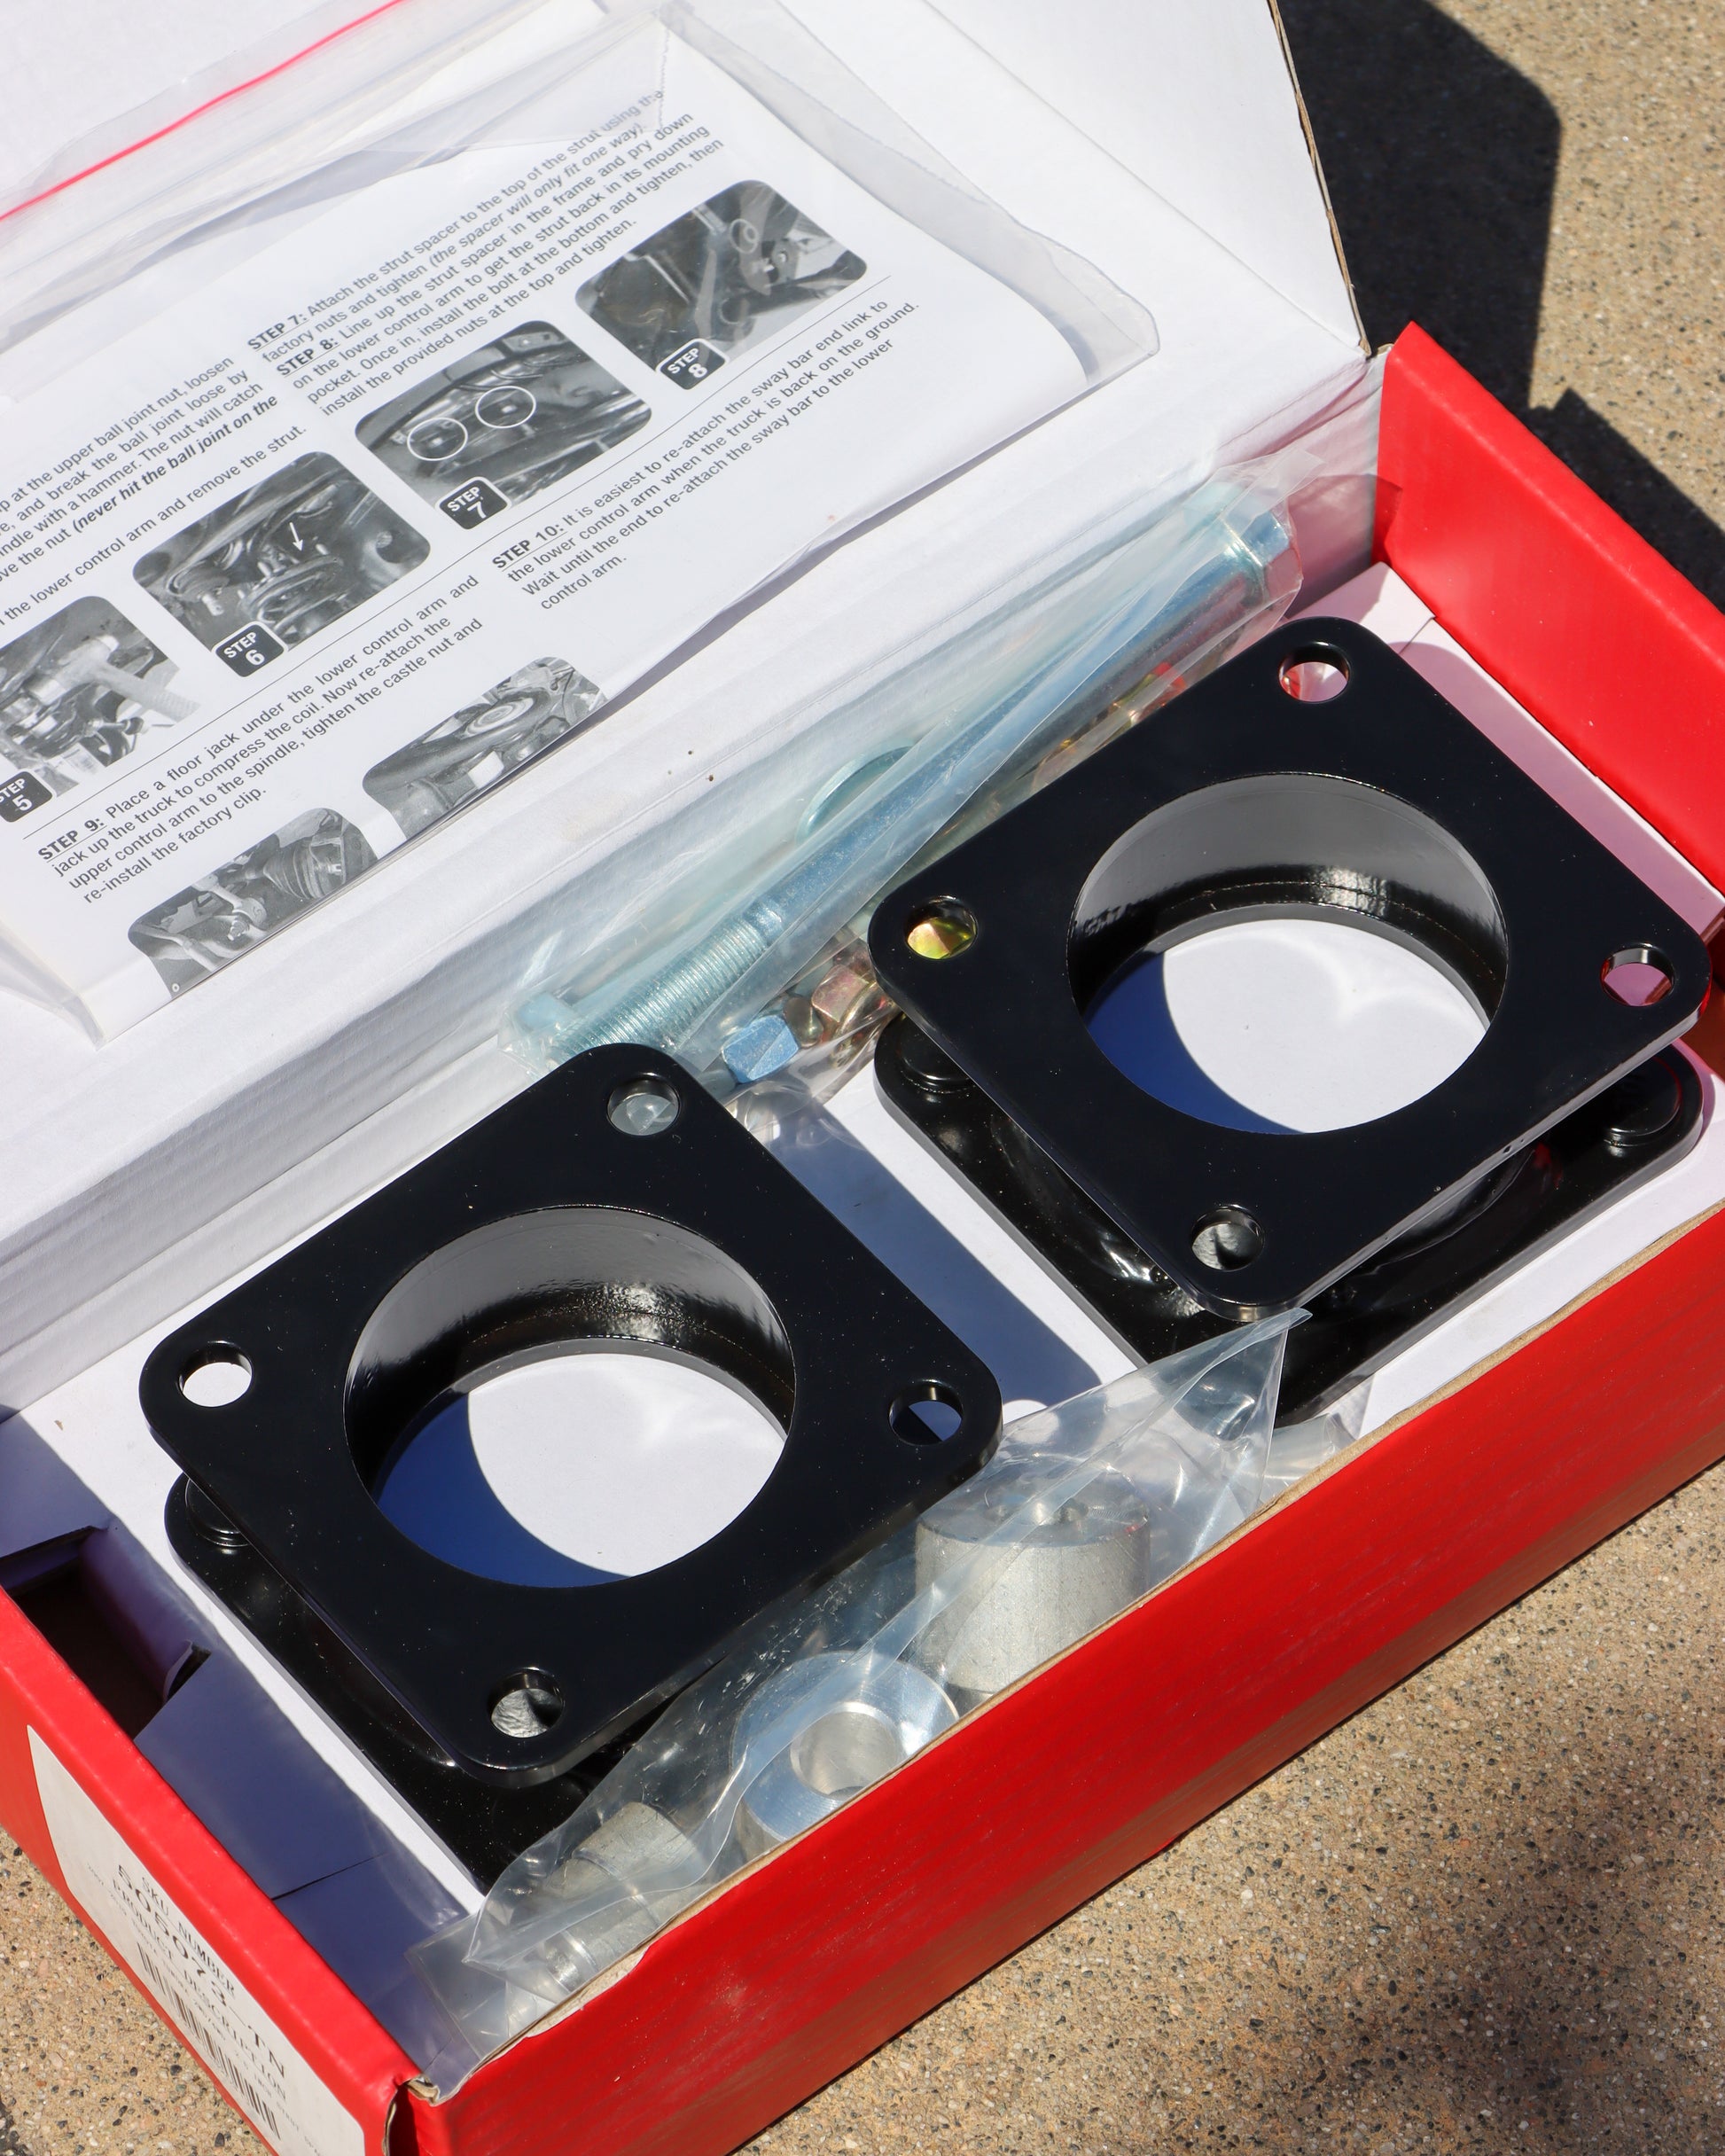 Open Box of the leveling kit with the strut spacers and hardware. 